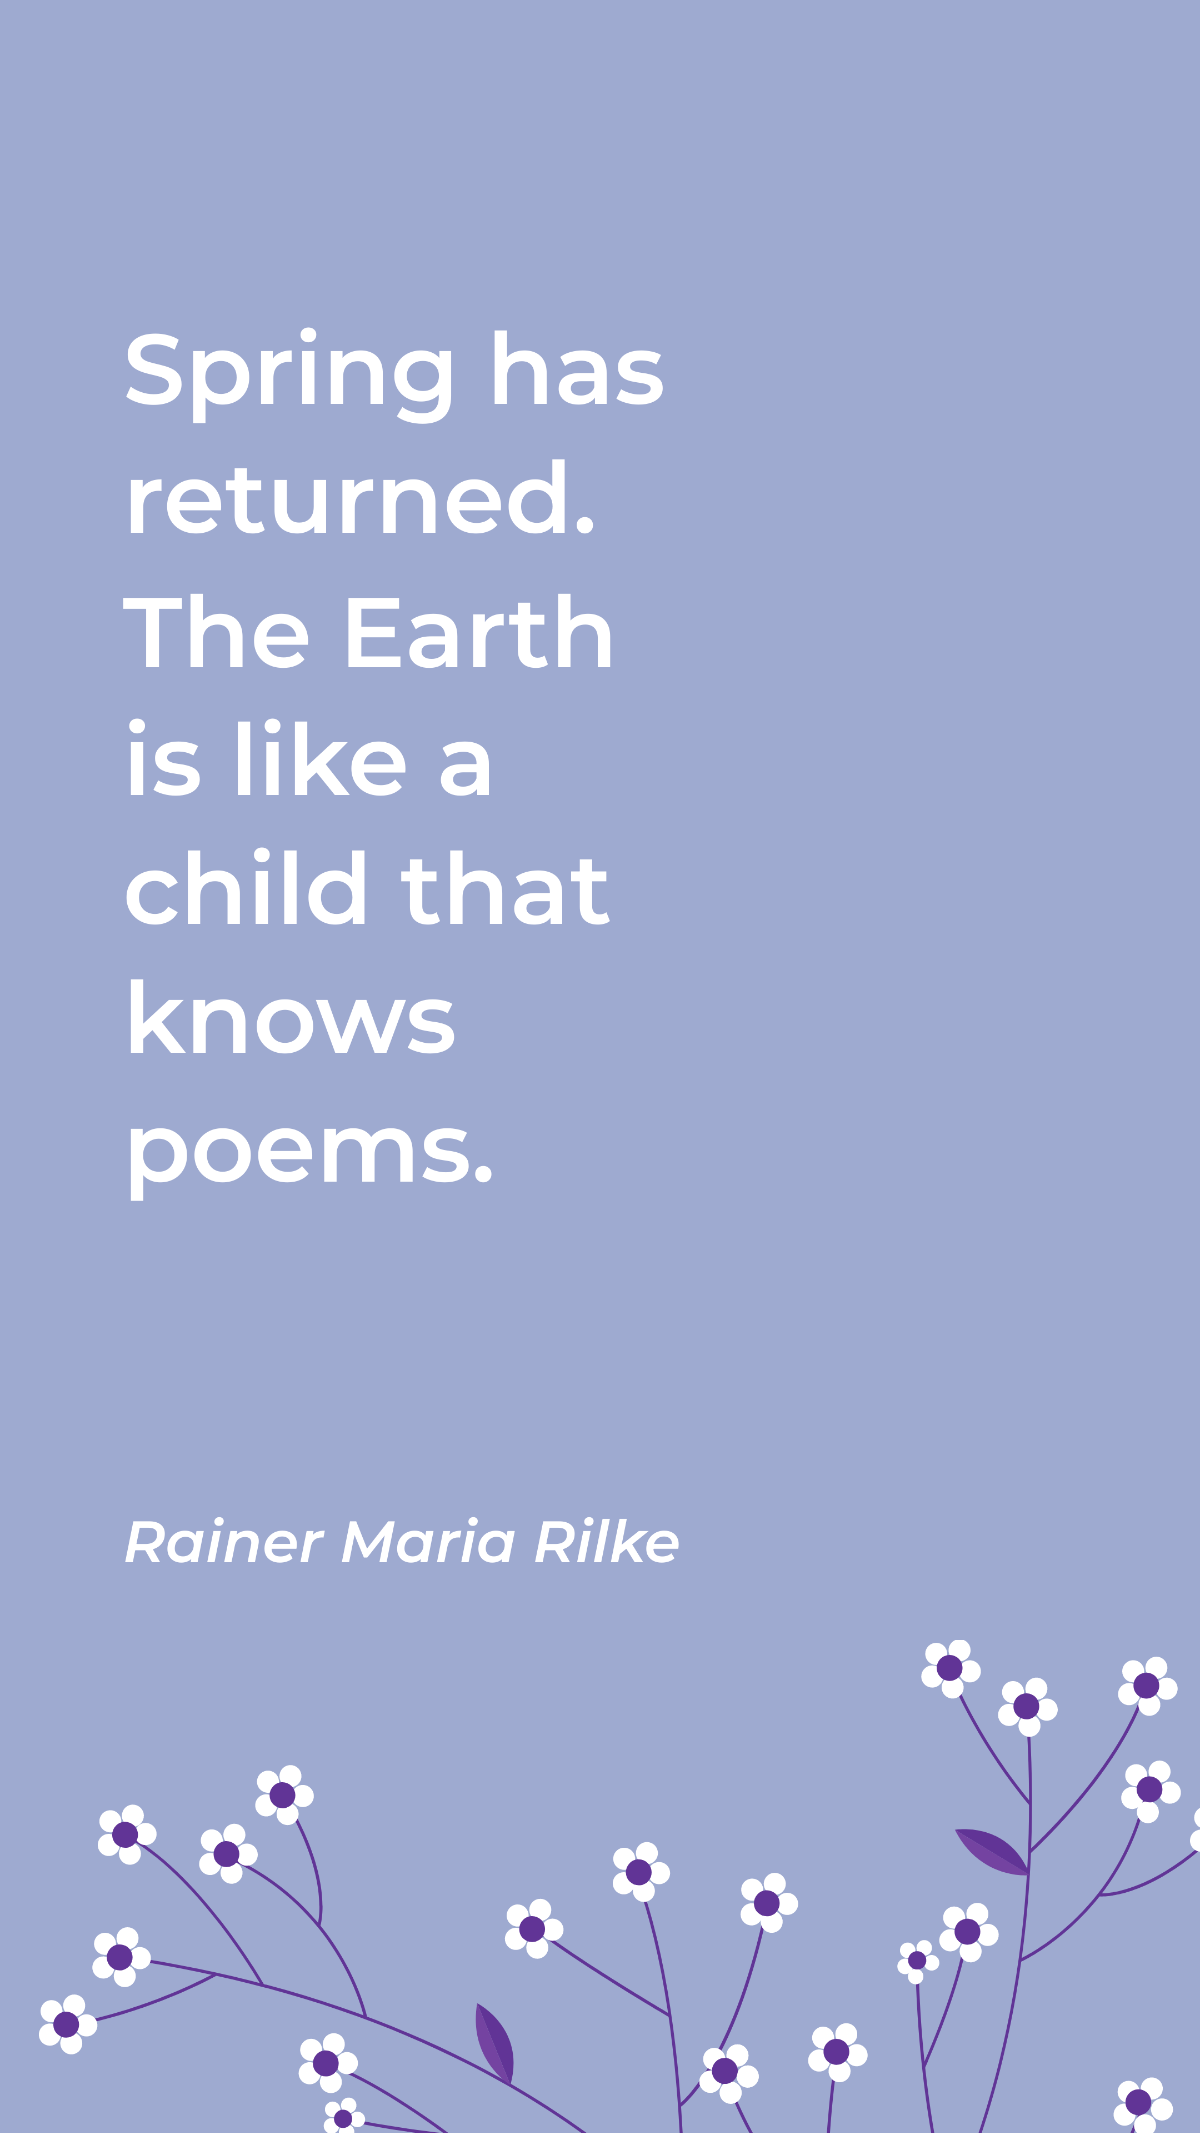 Rainer Maria Rilke - Spring has returned. The Earth is like a child that knows poems. Template